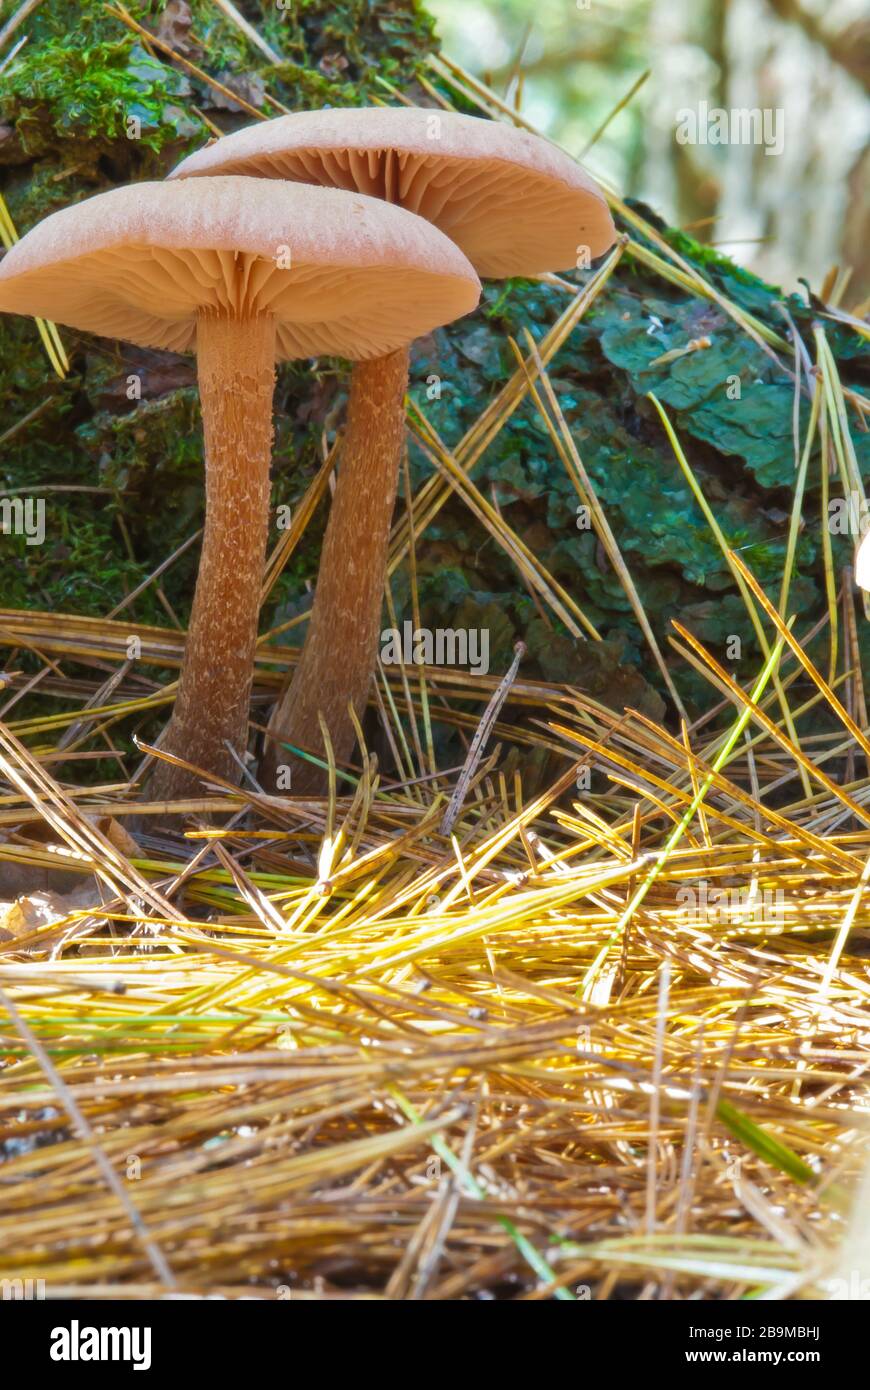 The deceiver mushroom, Laccaria laccata, growing in woodland among pine needles in eastern Ontario, Canada Stock Photo